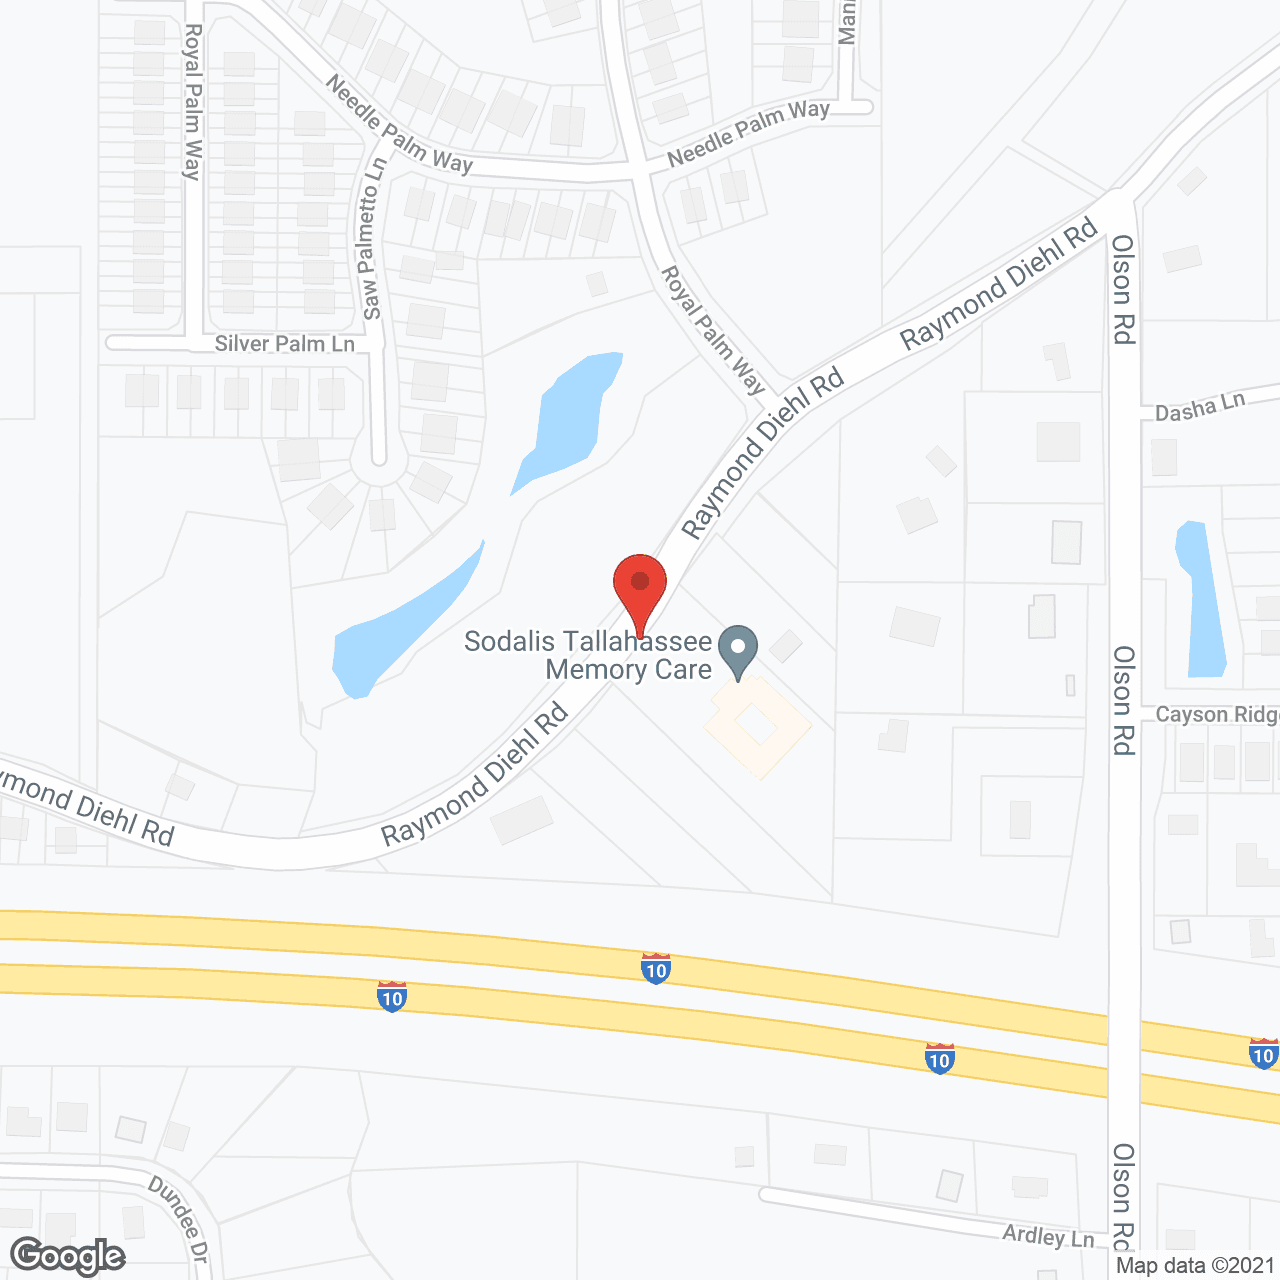 Sodalis Tallahassee Memory Care in google map